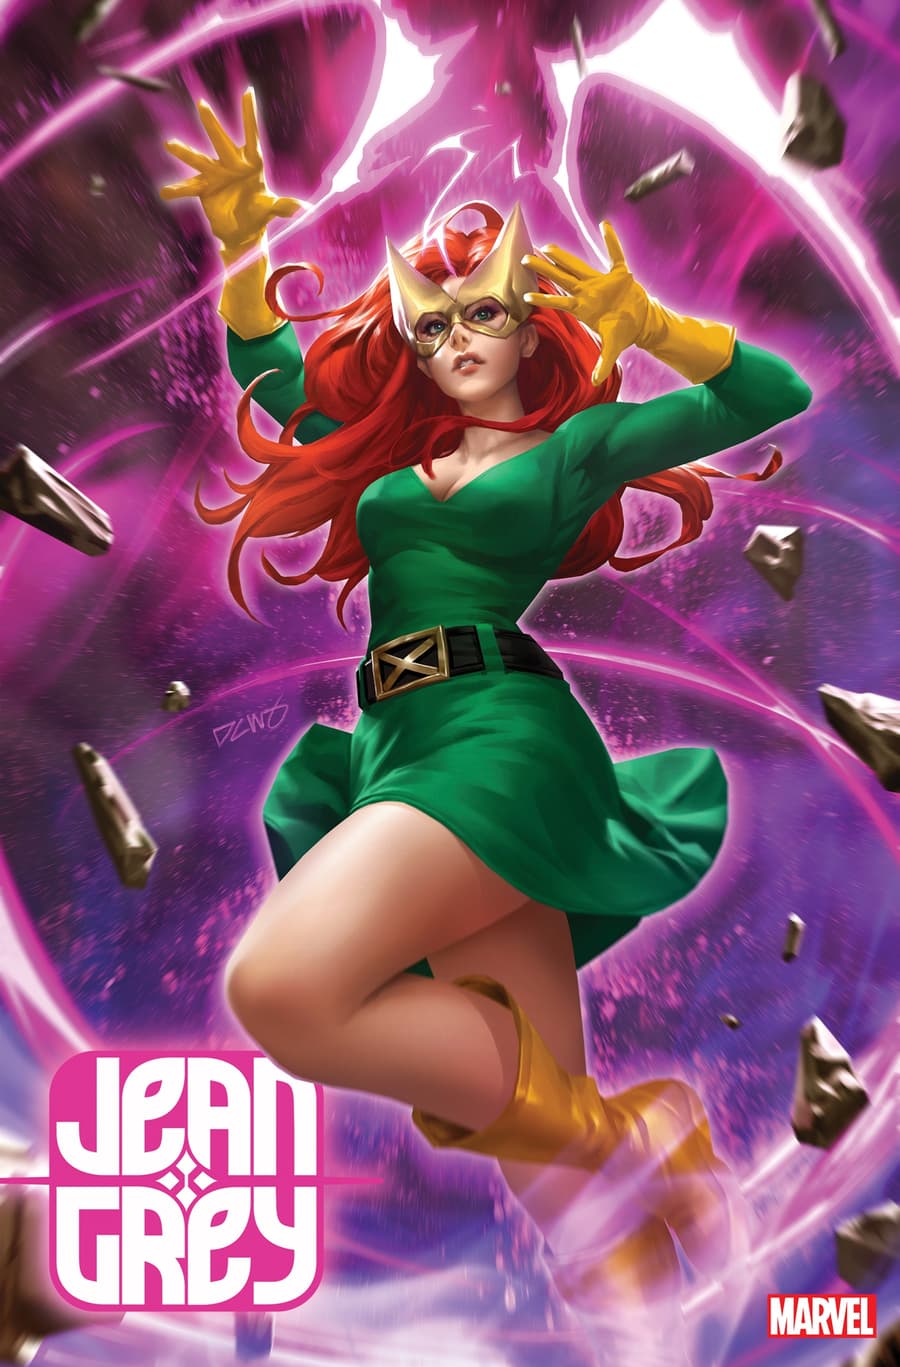 JEAN GREY #1 Variant Cover by Derrick Chew